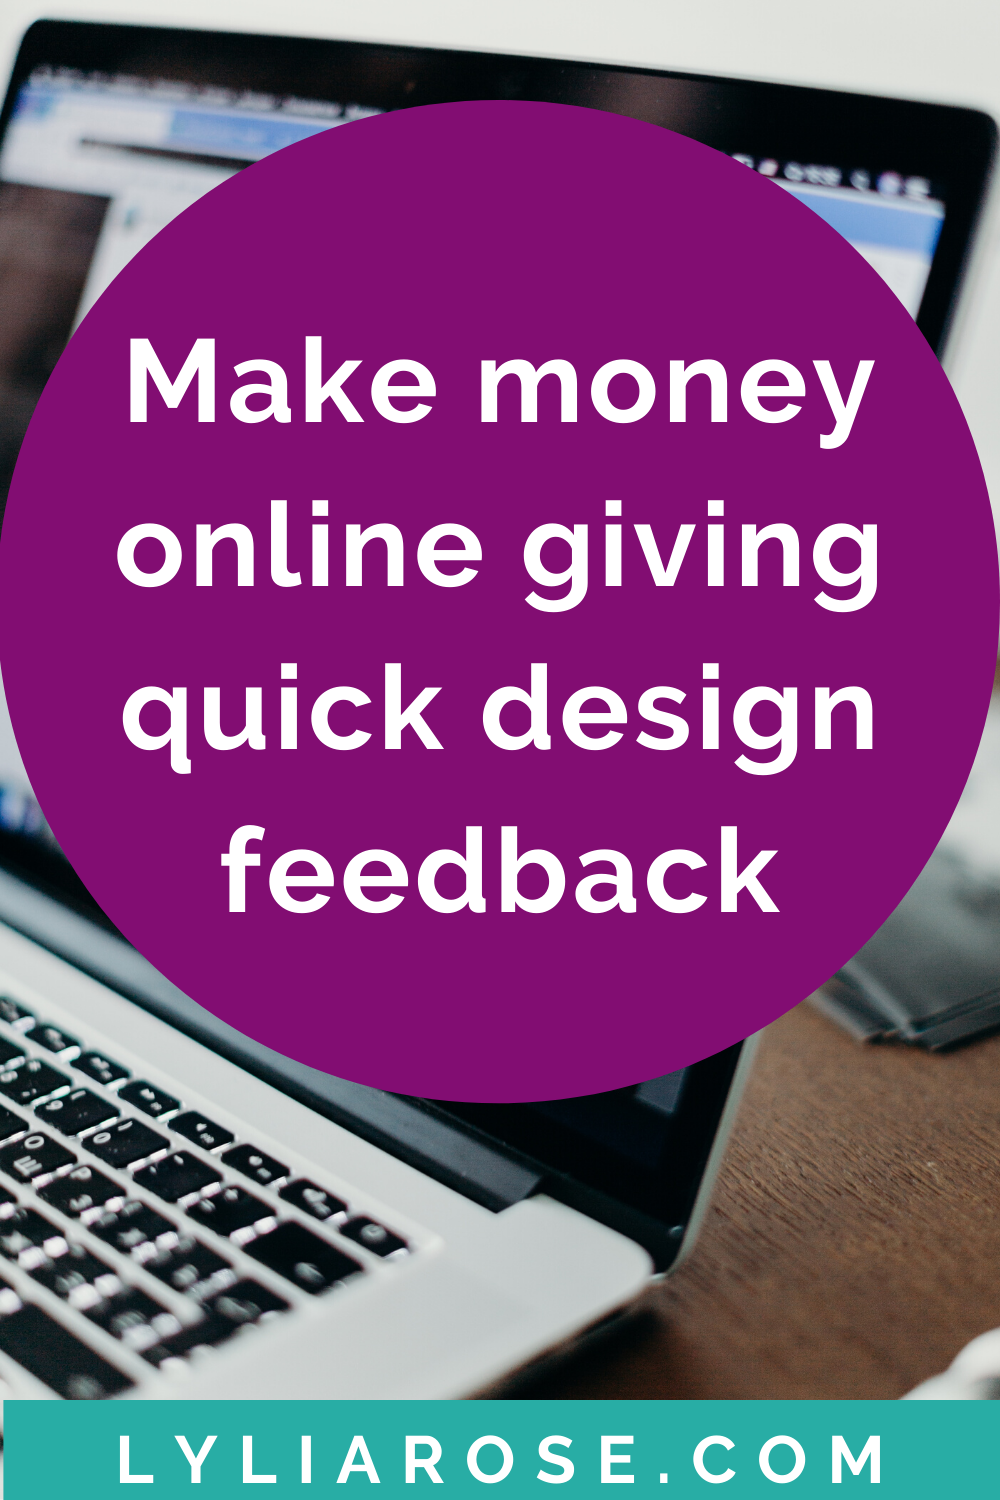 Usercrowd review_ Make money online giving quick design feedback